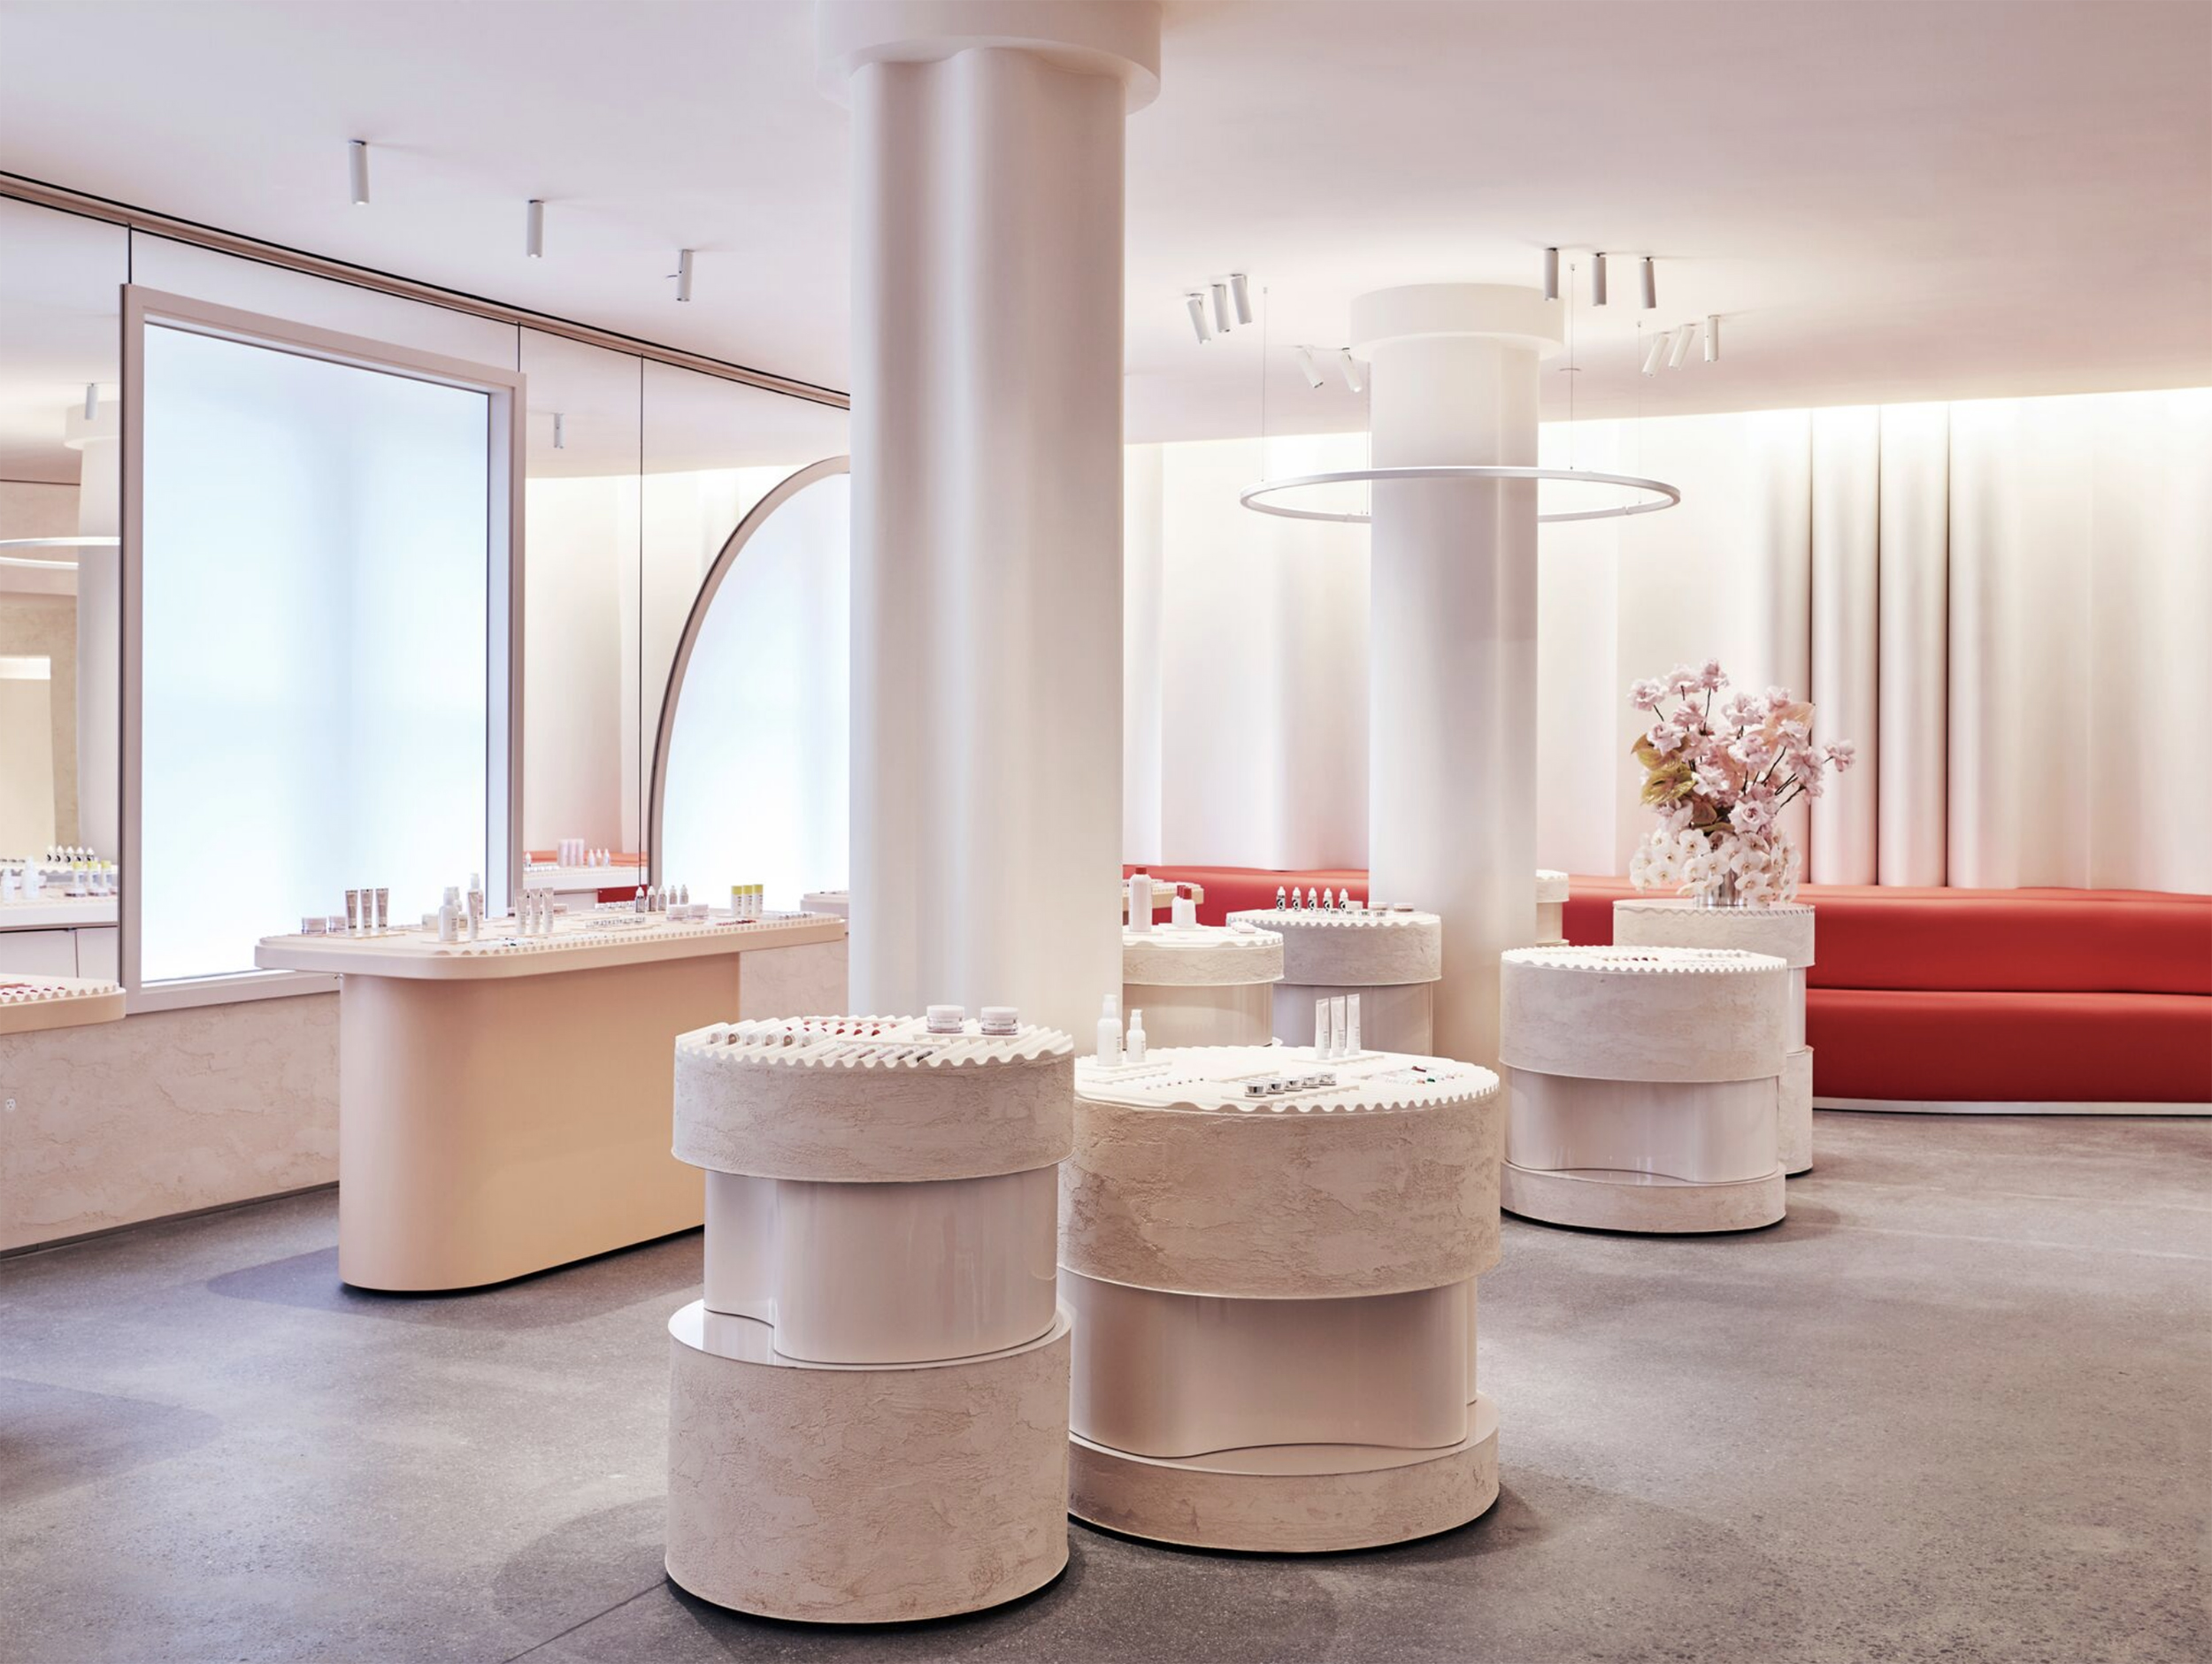 A Massive Glossier Flagship Store Has Opened In SoHo